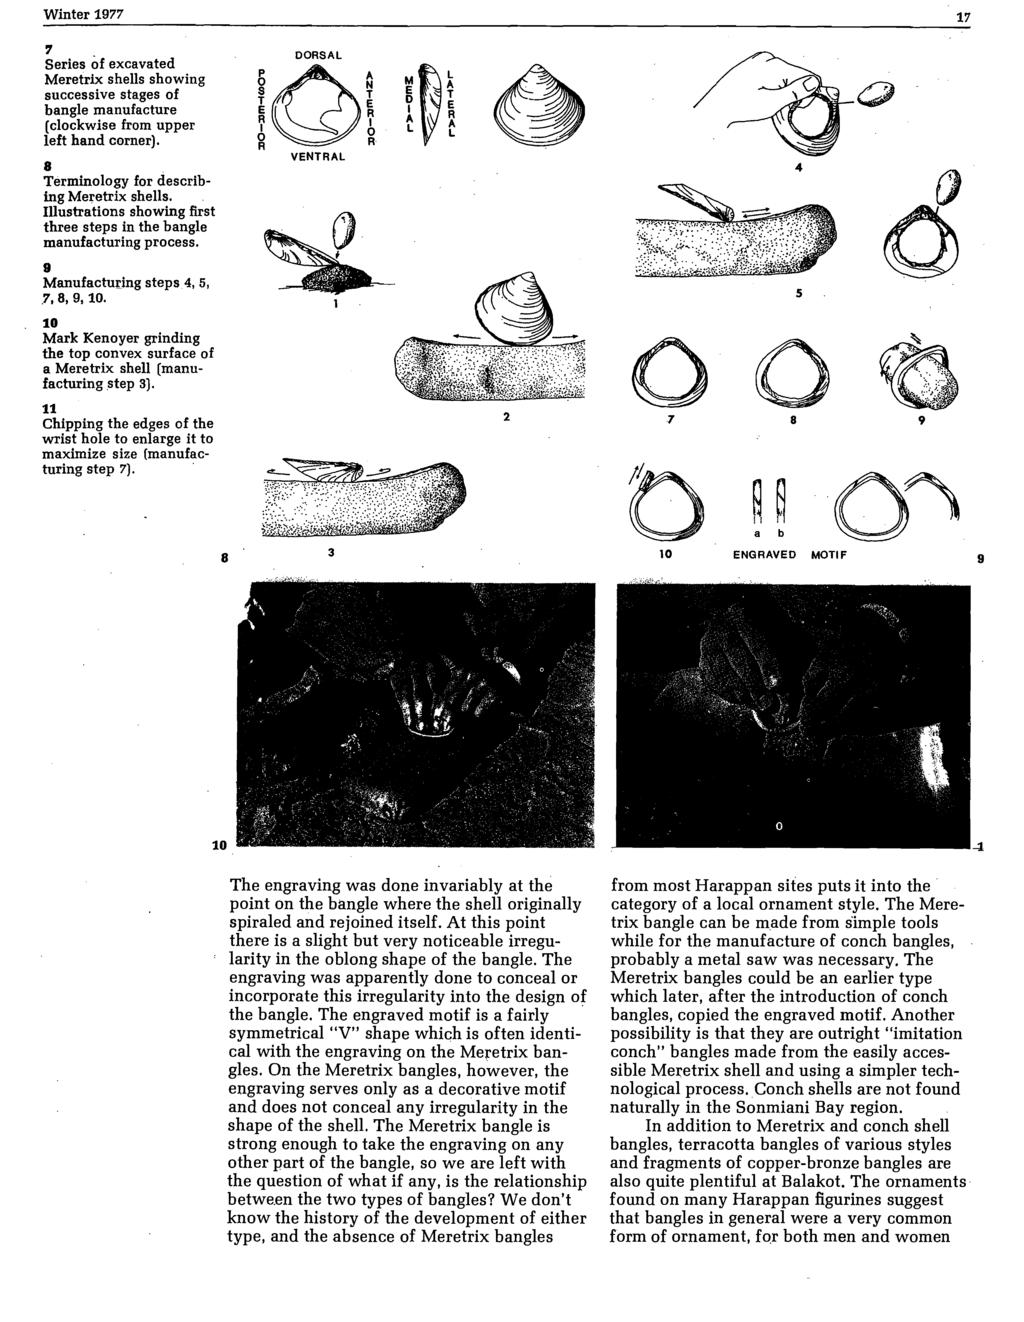 '1 Series of excavated Meretrix shells showing successive stages of bangle manufacture (clockwise from upper left hand corner). 8 Terminology for describ ing Me~etrix shells.